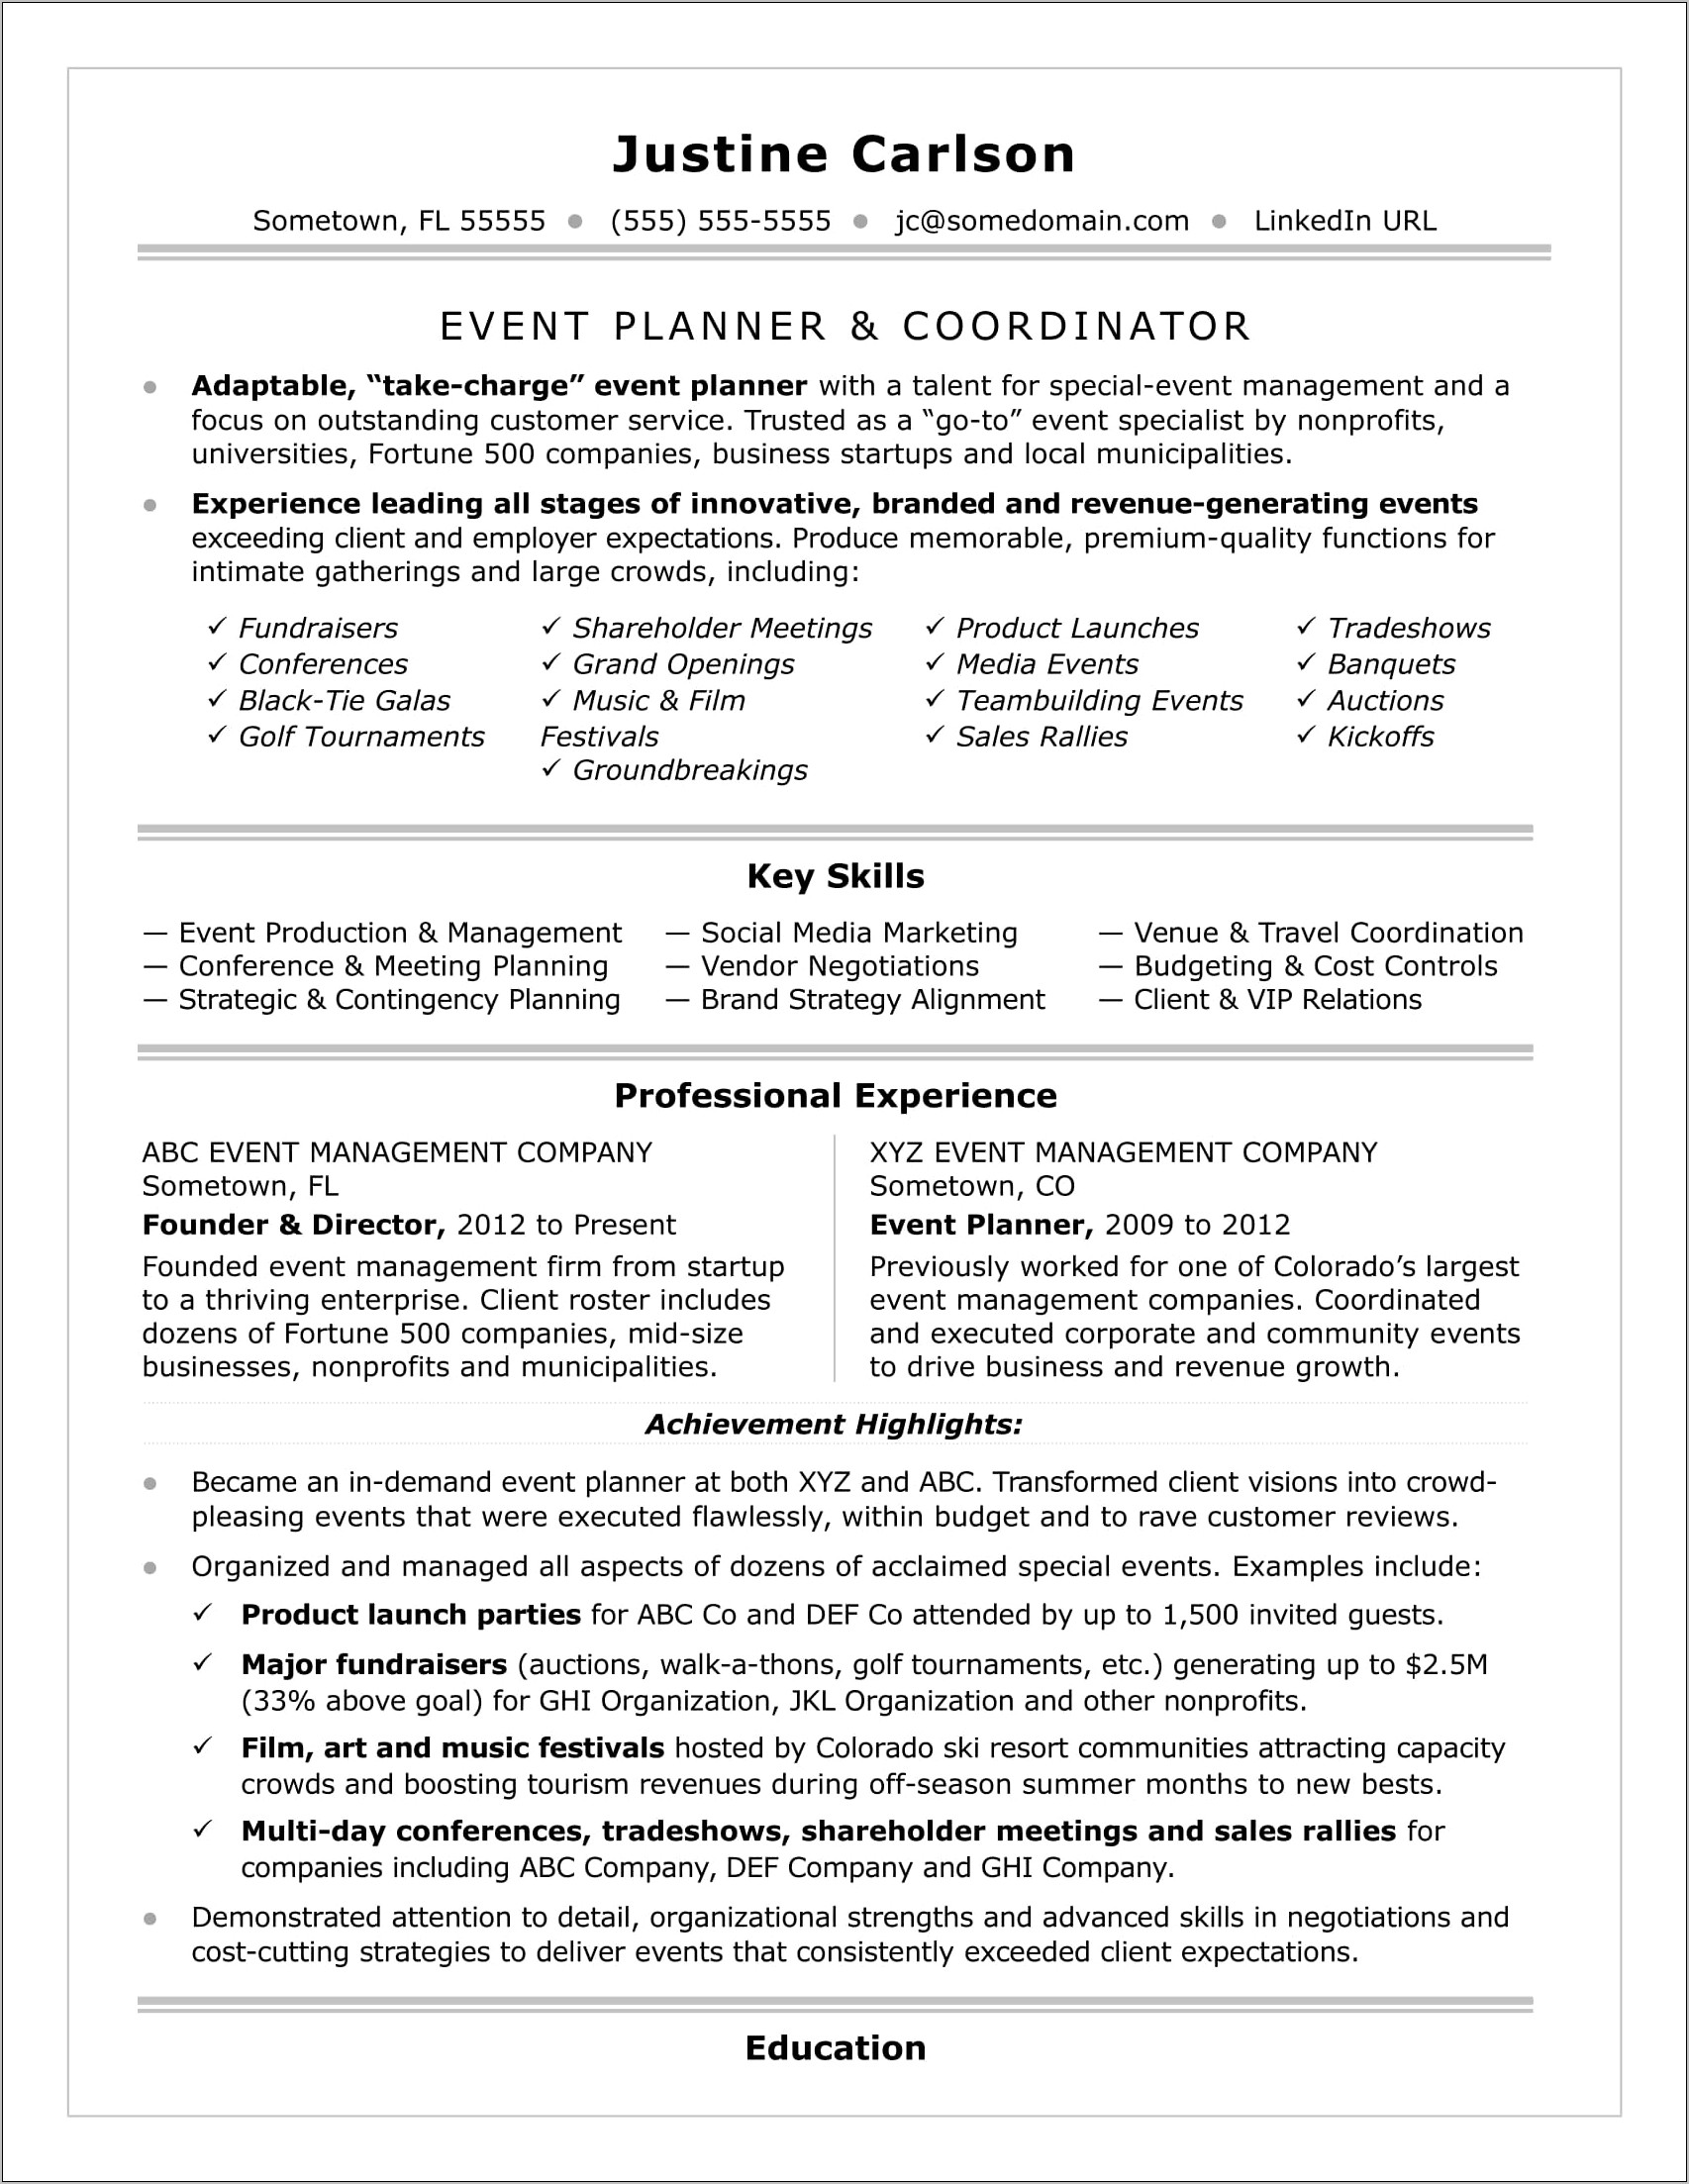 Resume Examples For Promotion Within Company